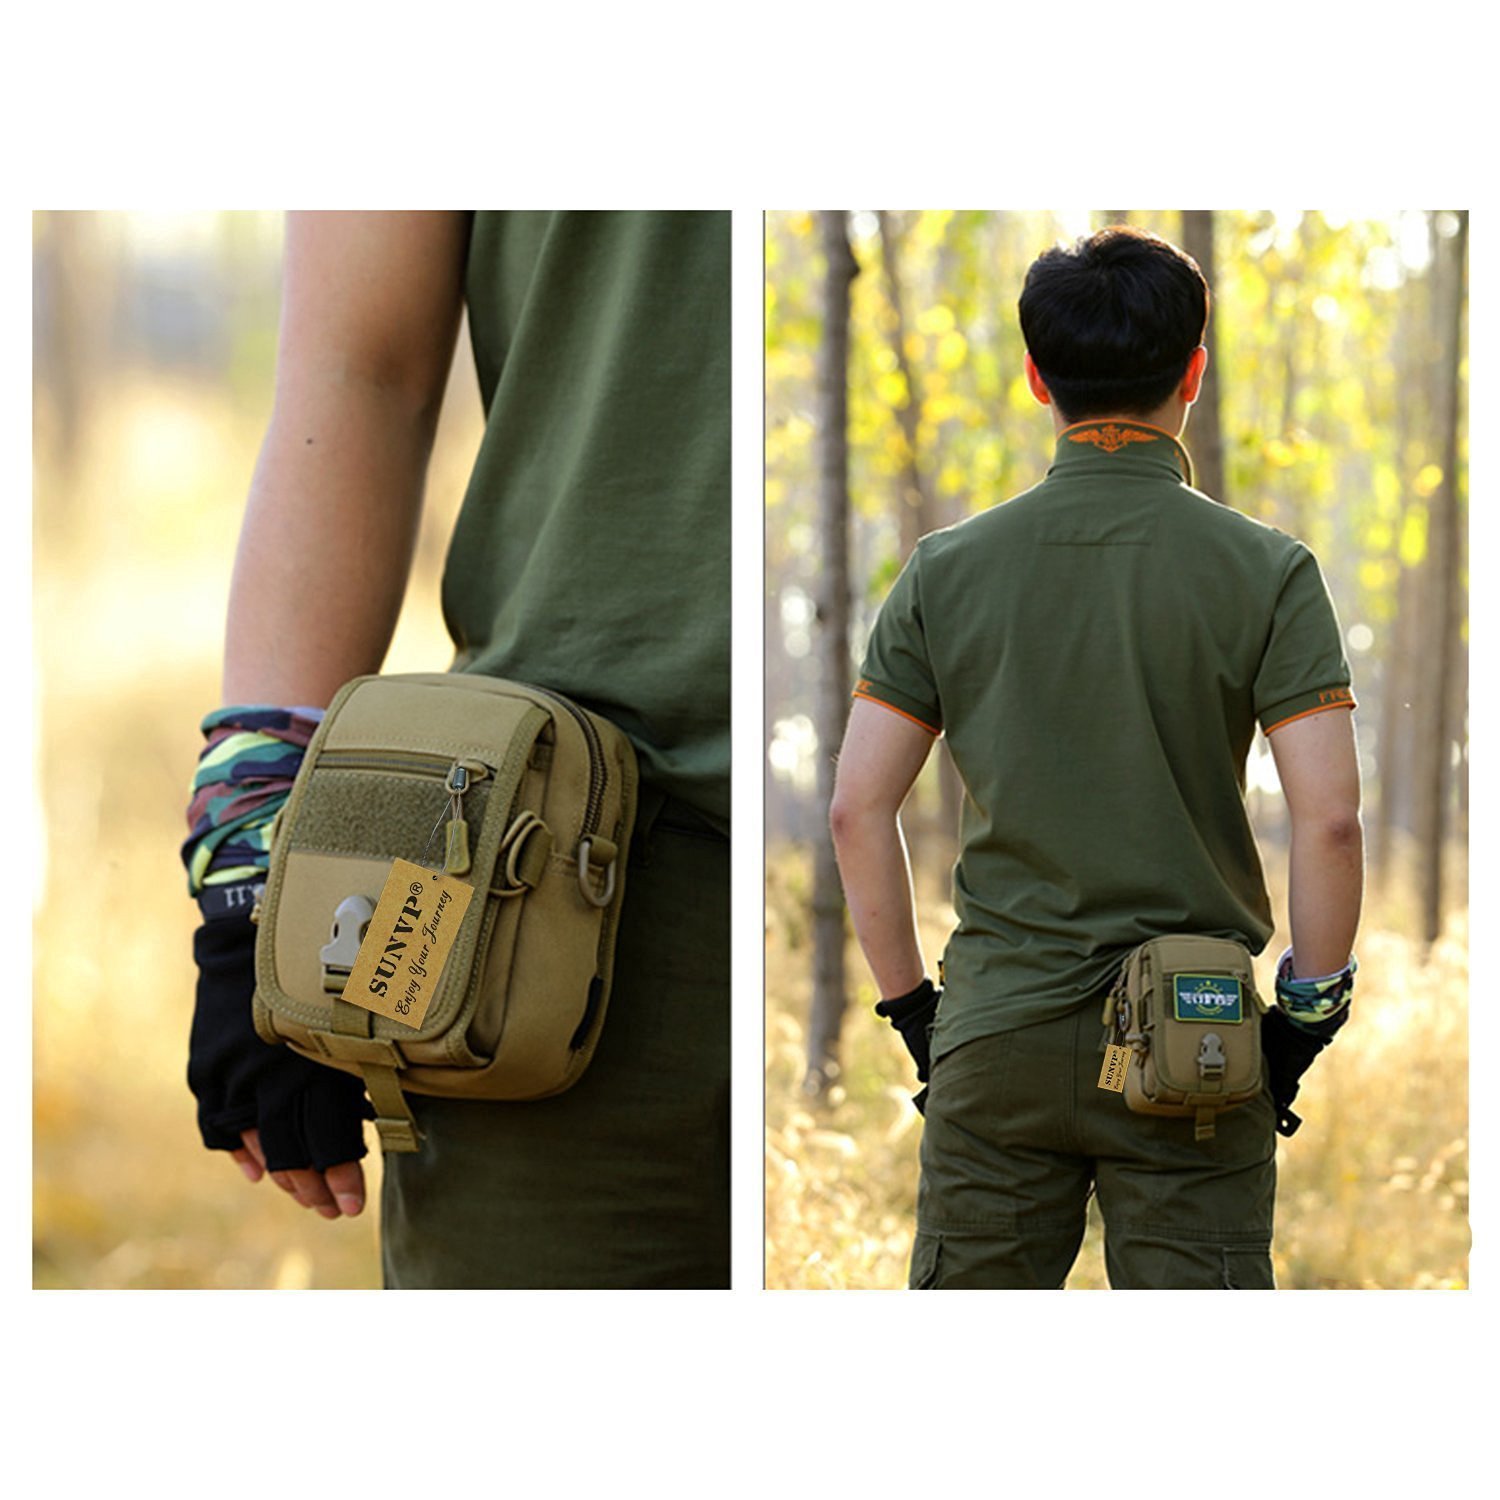 Protector Plus Military Tactical MOLLE Phone Pouch Waist Belt Bag Pack ...